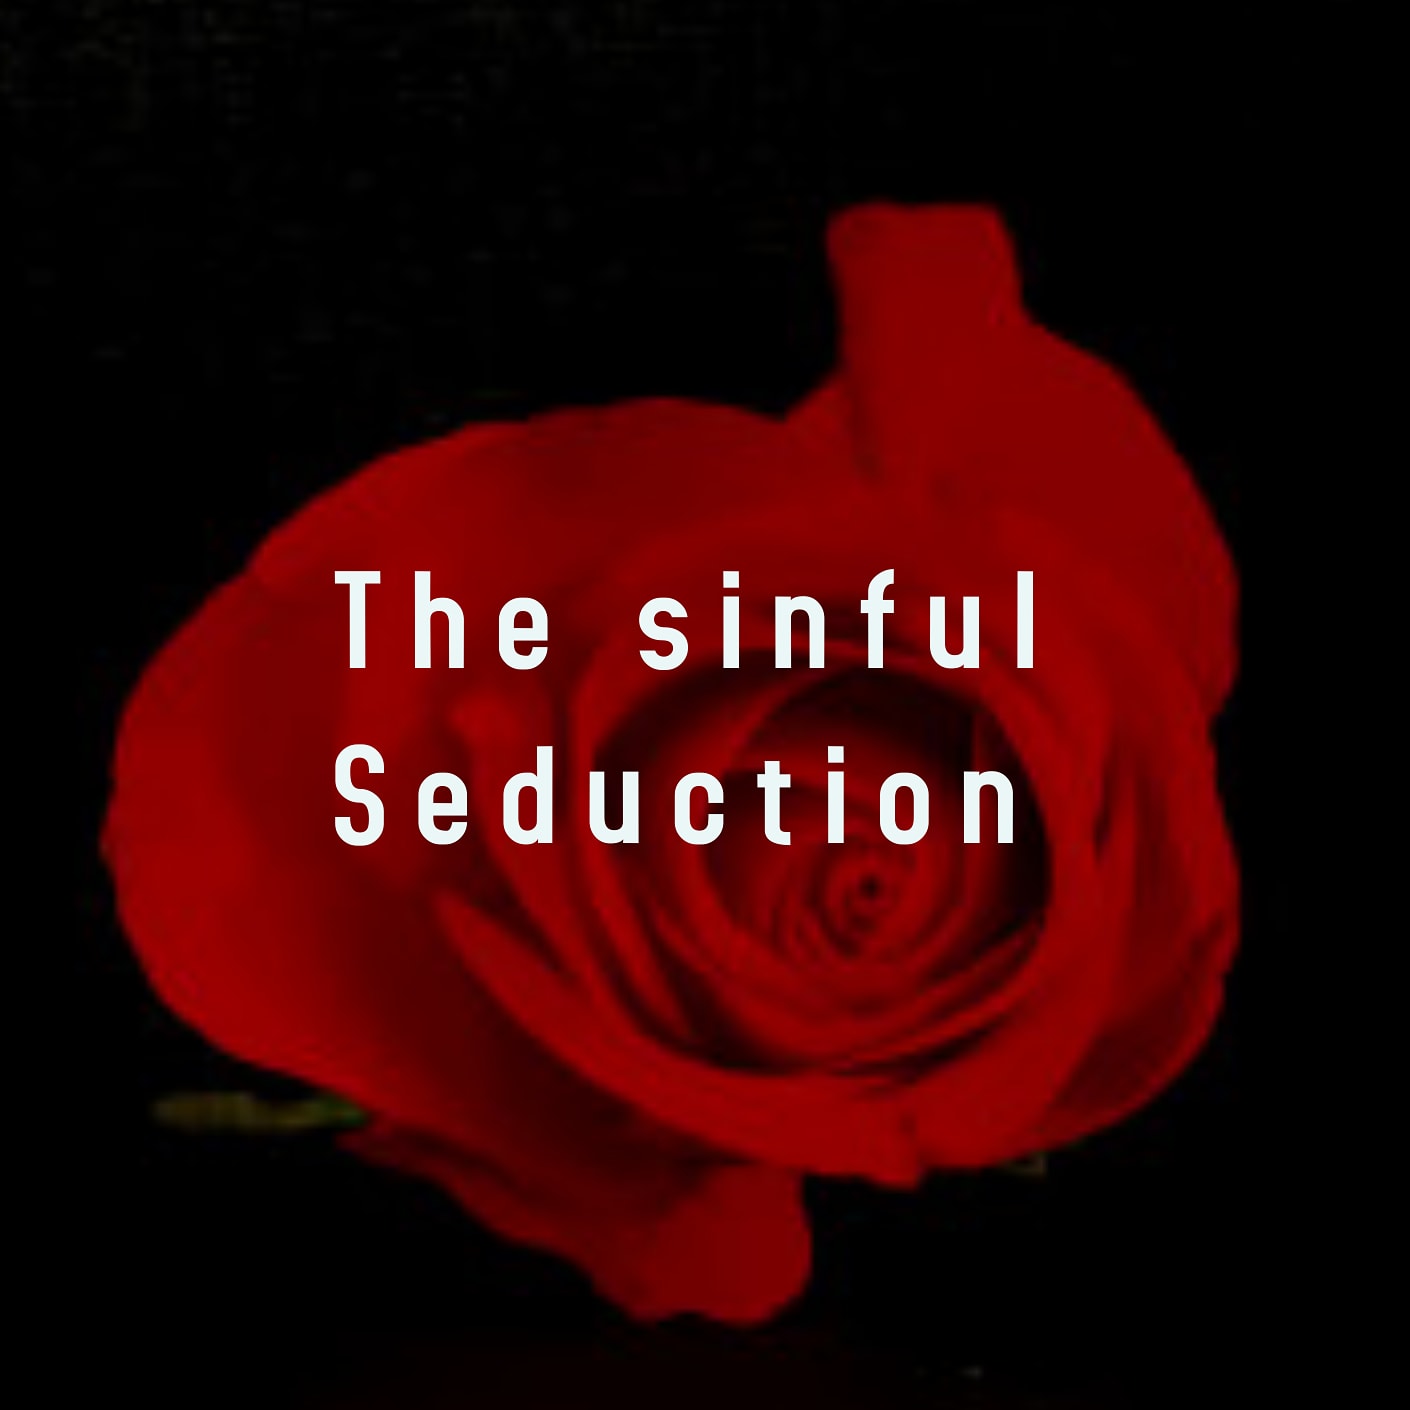 The Sinful Seduction